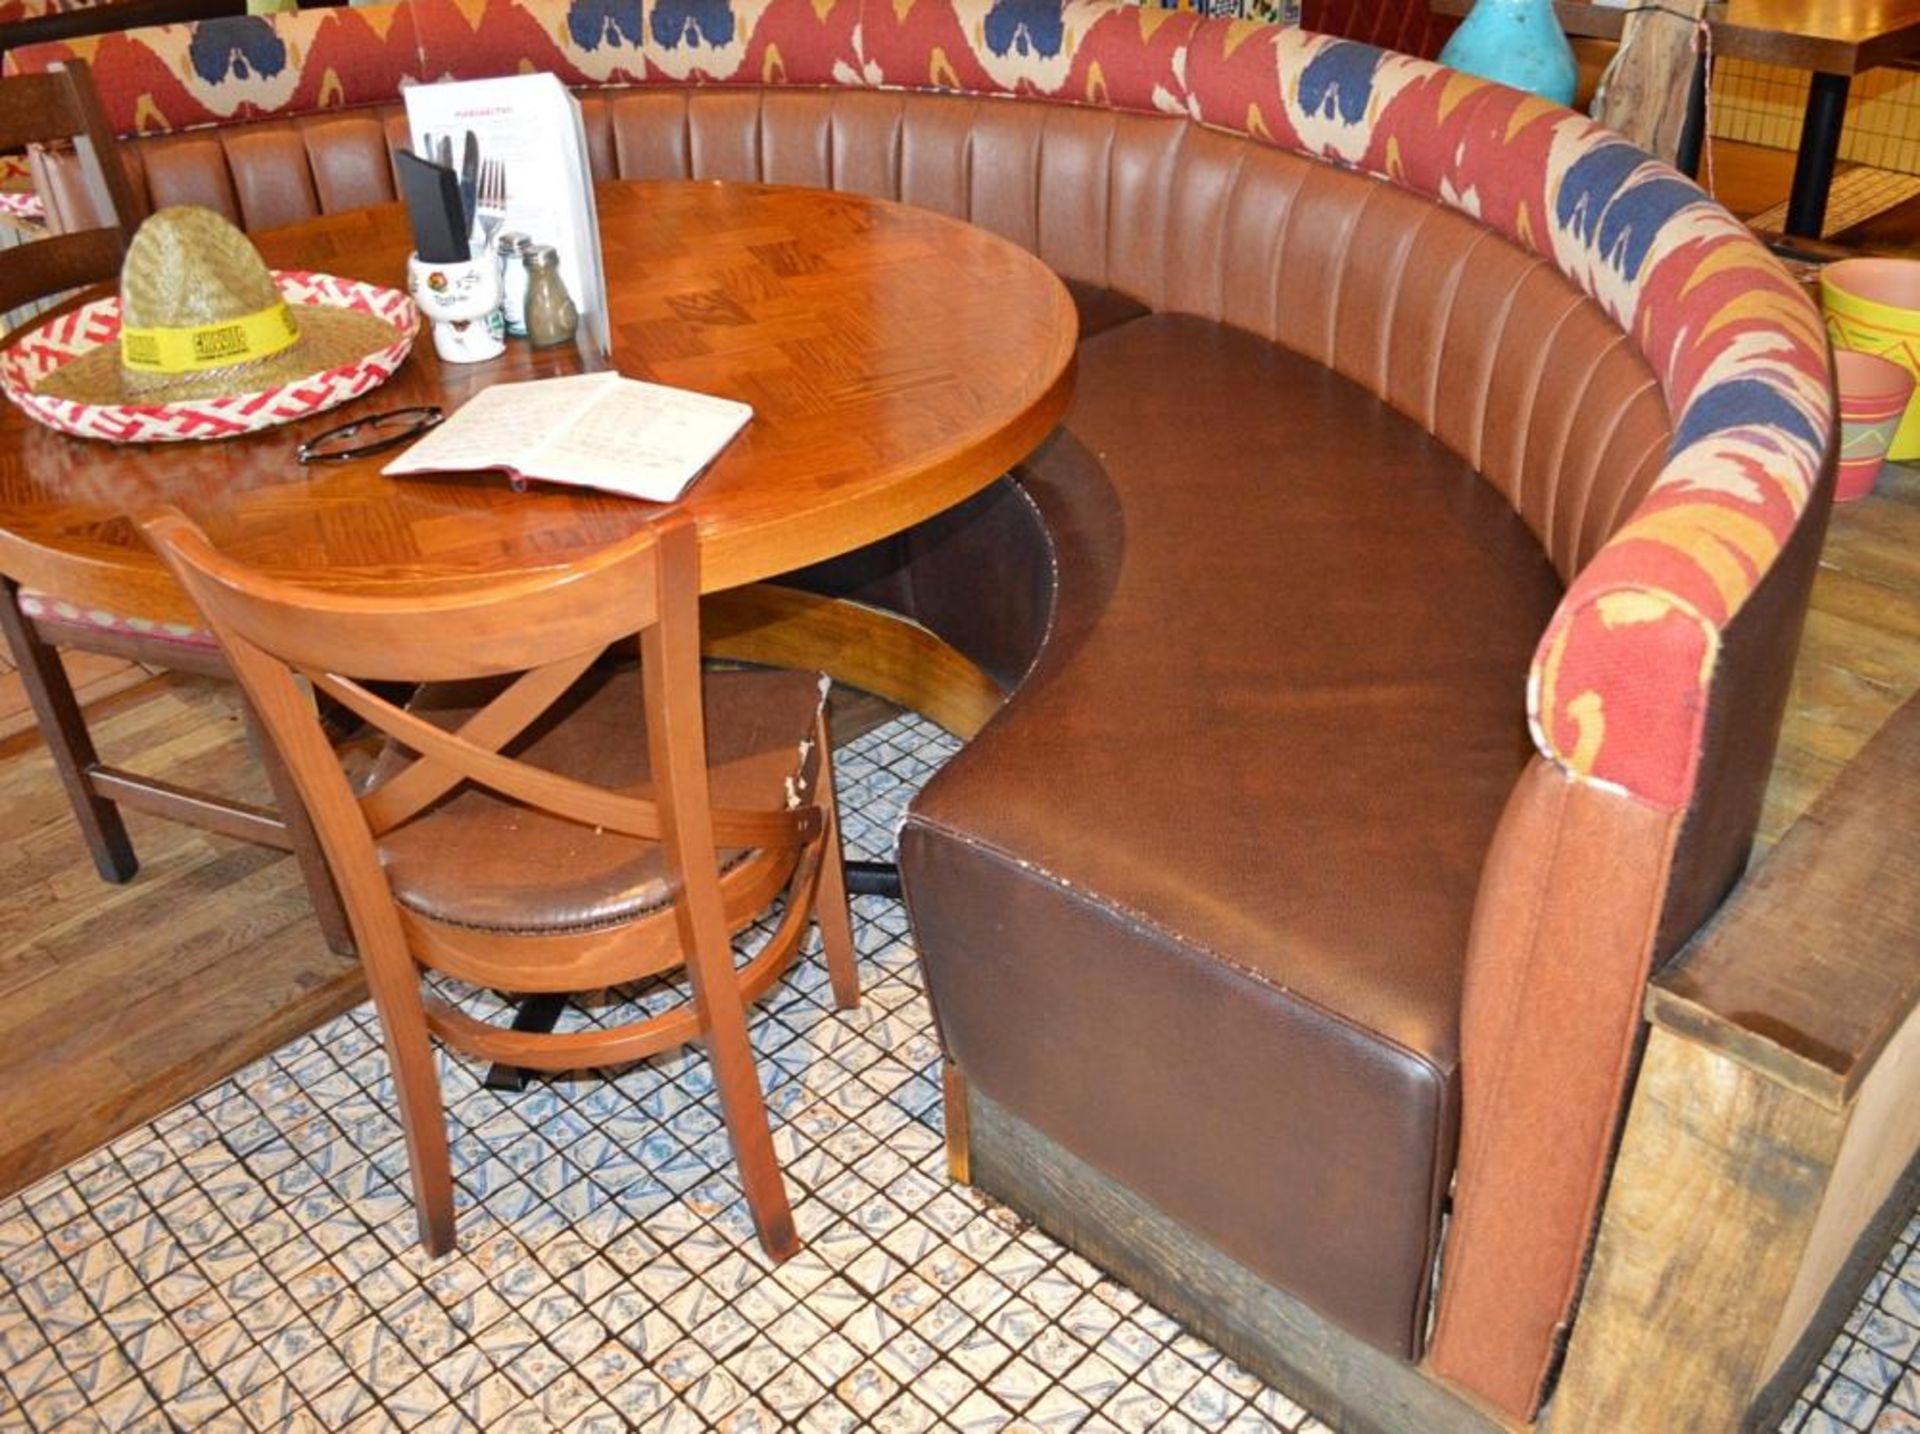 2 x Half Circle Seating Booths / Banquet Seating - Faux Leather Brown Seating With Yellow and Brown - Image 14 of 15